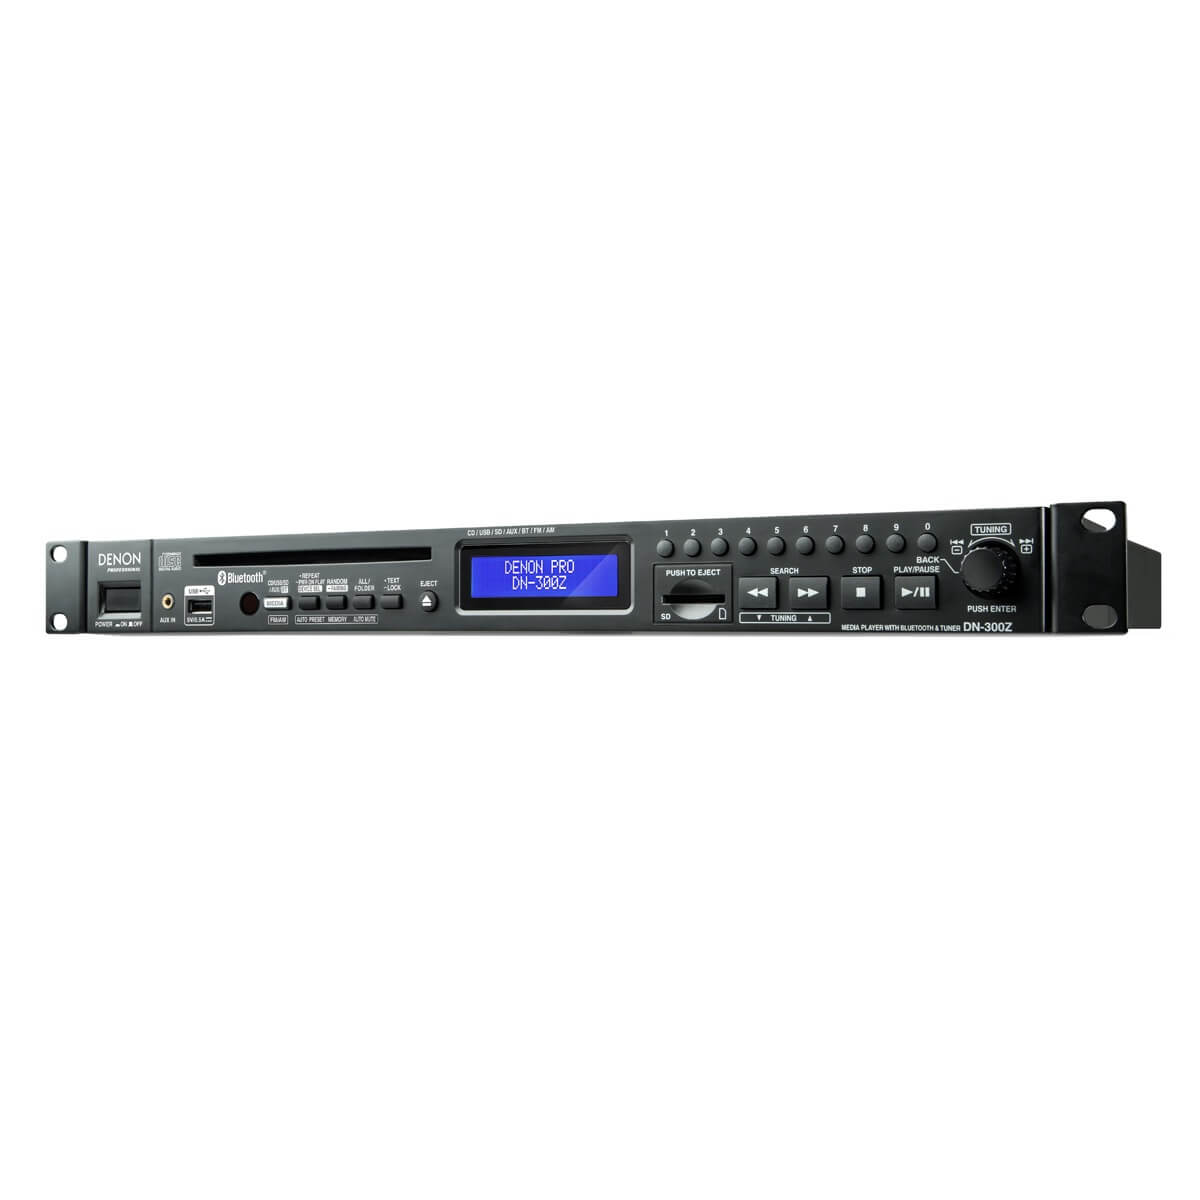 Denon DN-300Z Media Player with Bluetooth Receiver and AM/FM Tuner, right